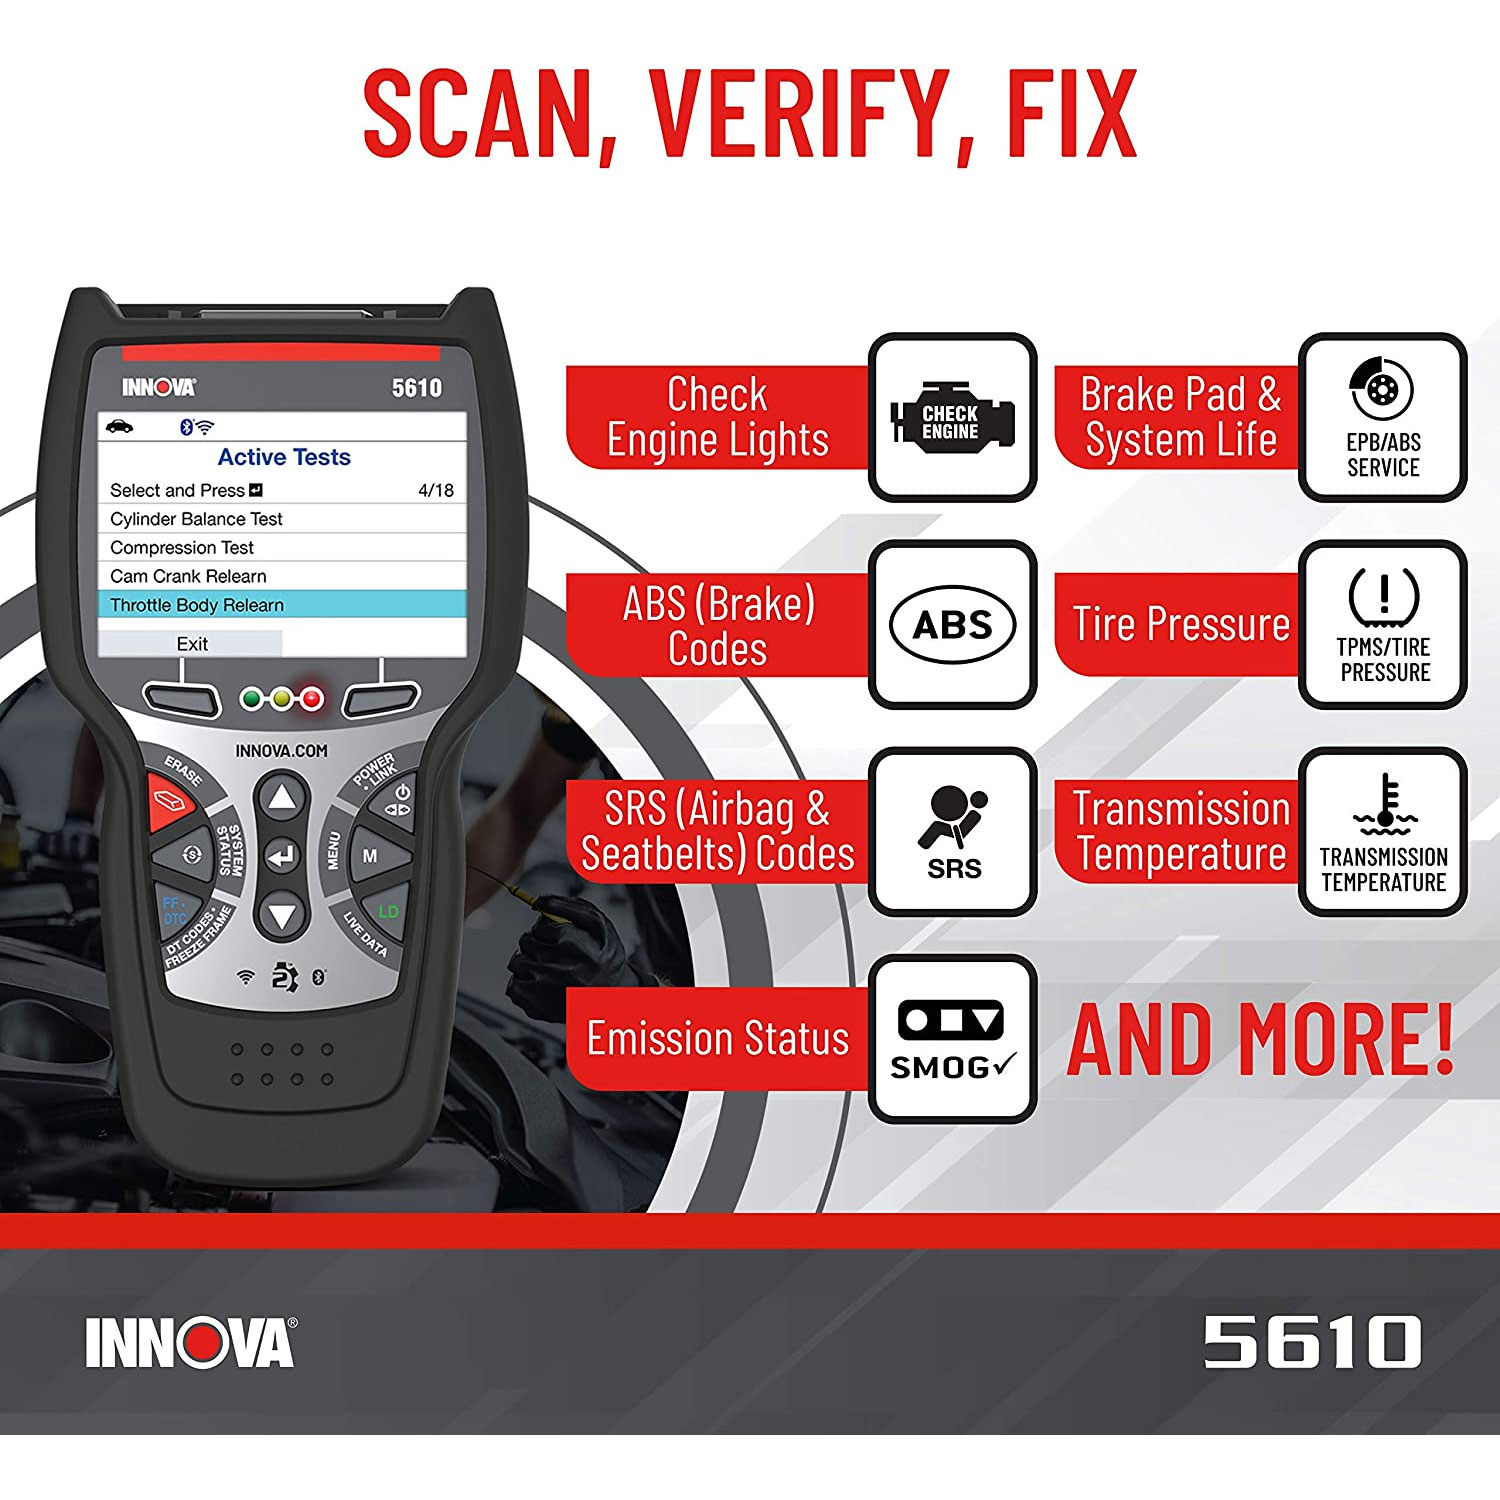 INNOVA 5610 CarScan Pro Bluetooth Code Reader Vehicle Diagnostic Scanner Tool - image 2 of 8